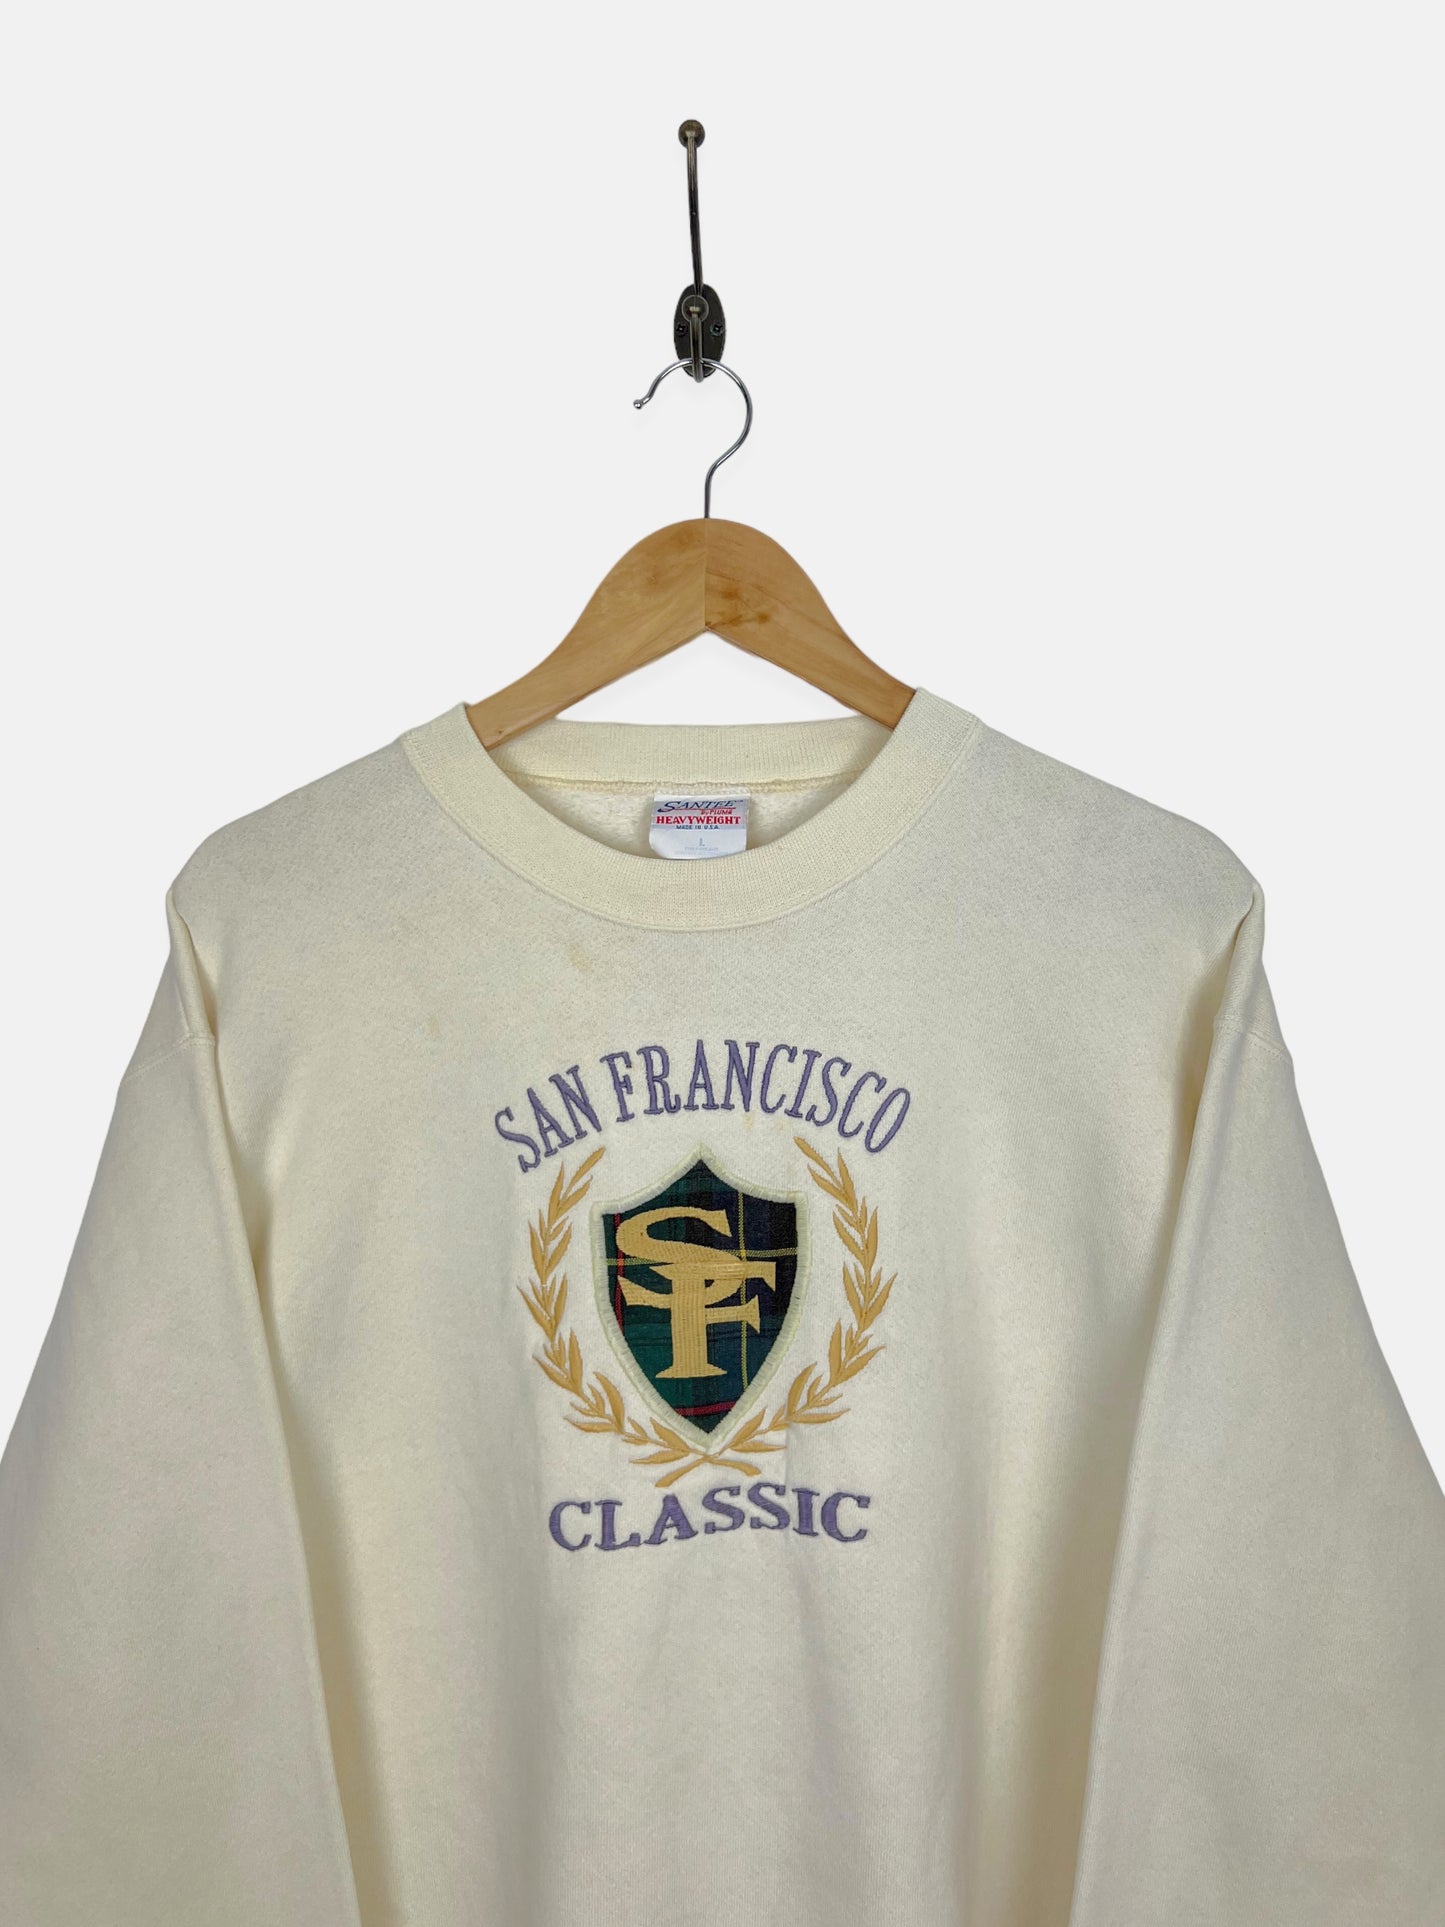 90's San Francisco Classic USA Made Embroidered Vintage Sweatshirt Size M-L